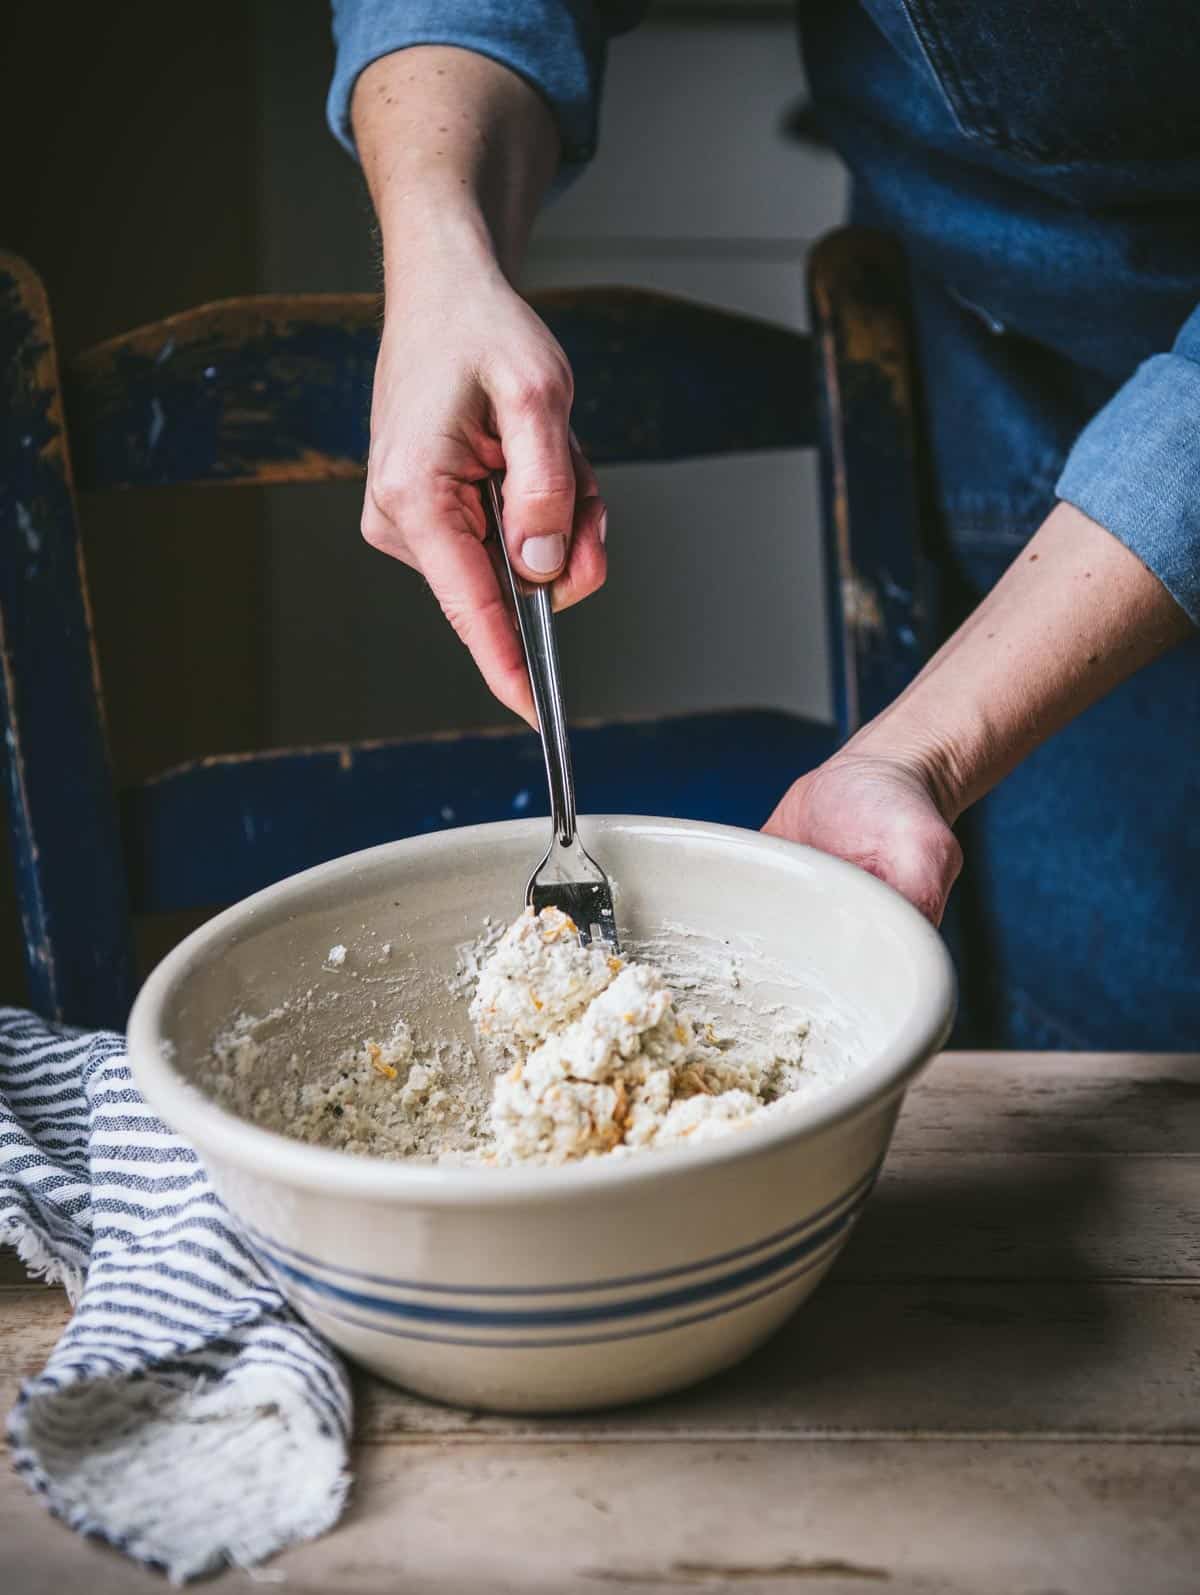 Stirring biscuit dough in a bowl.